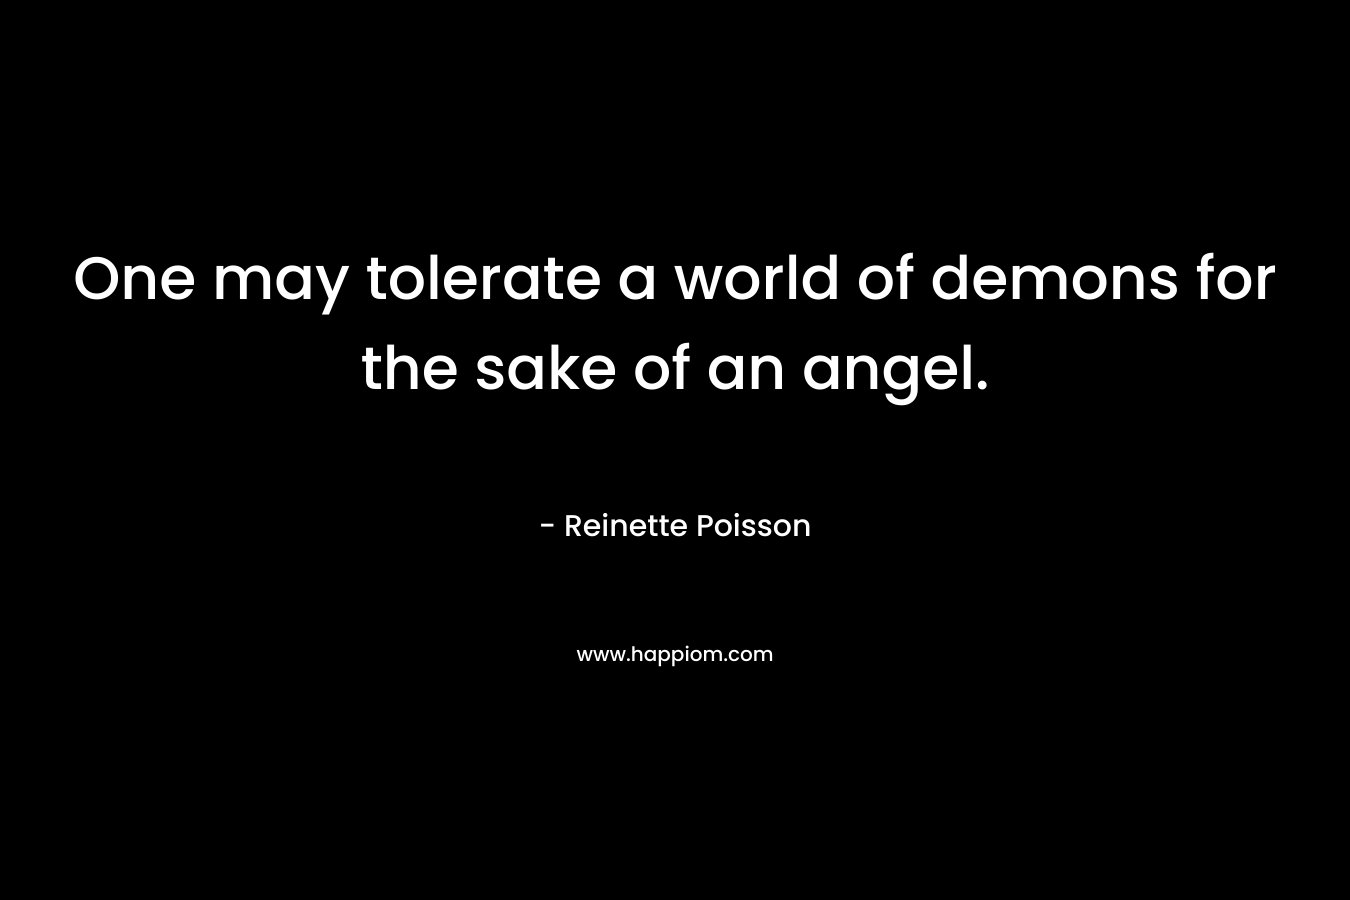 One may tolerate a world of demons for the sake of an angel. – Reinette Poisson